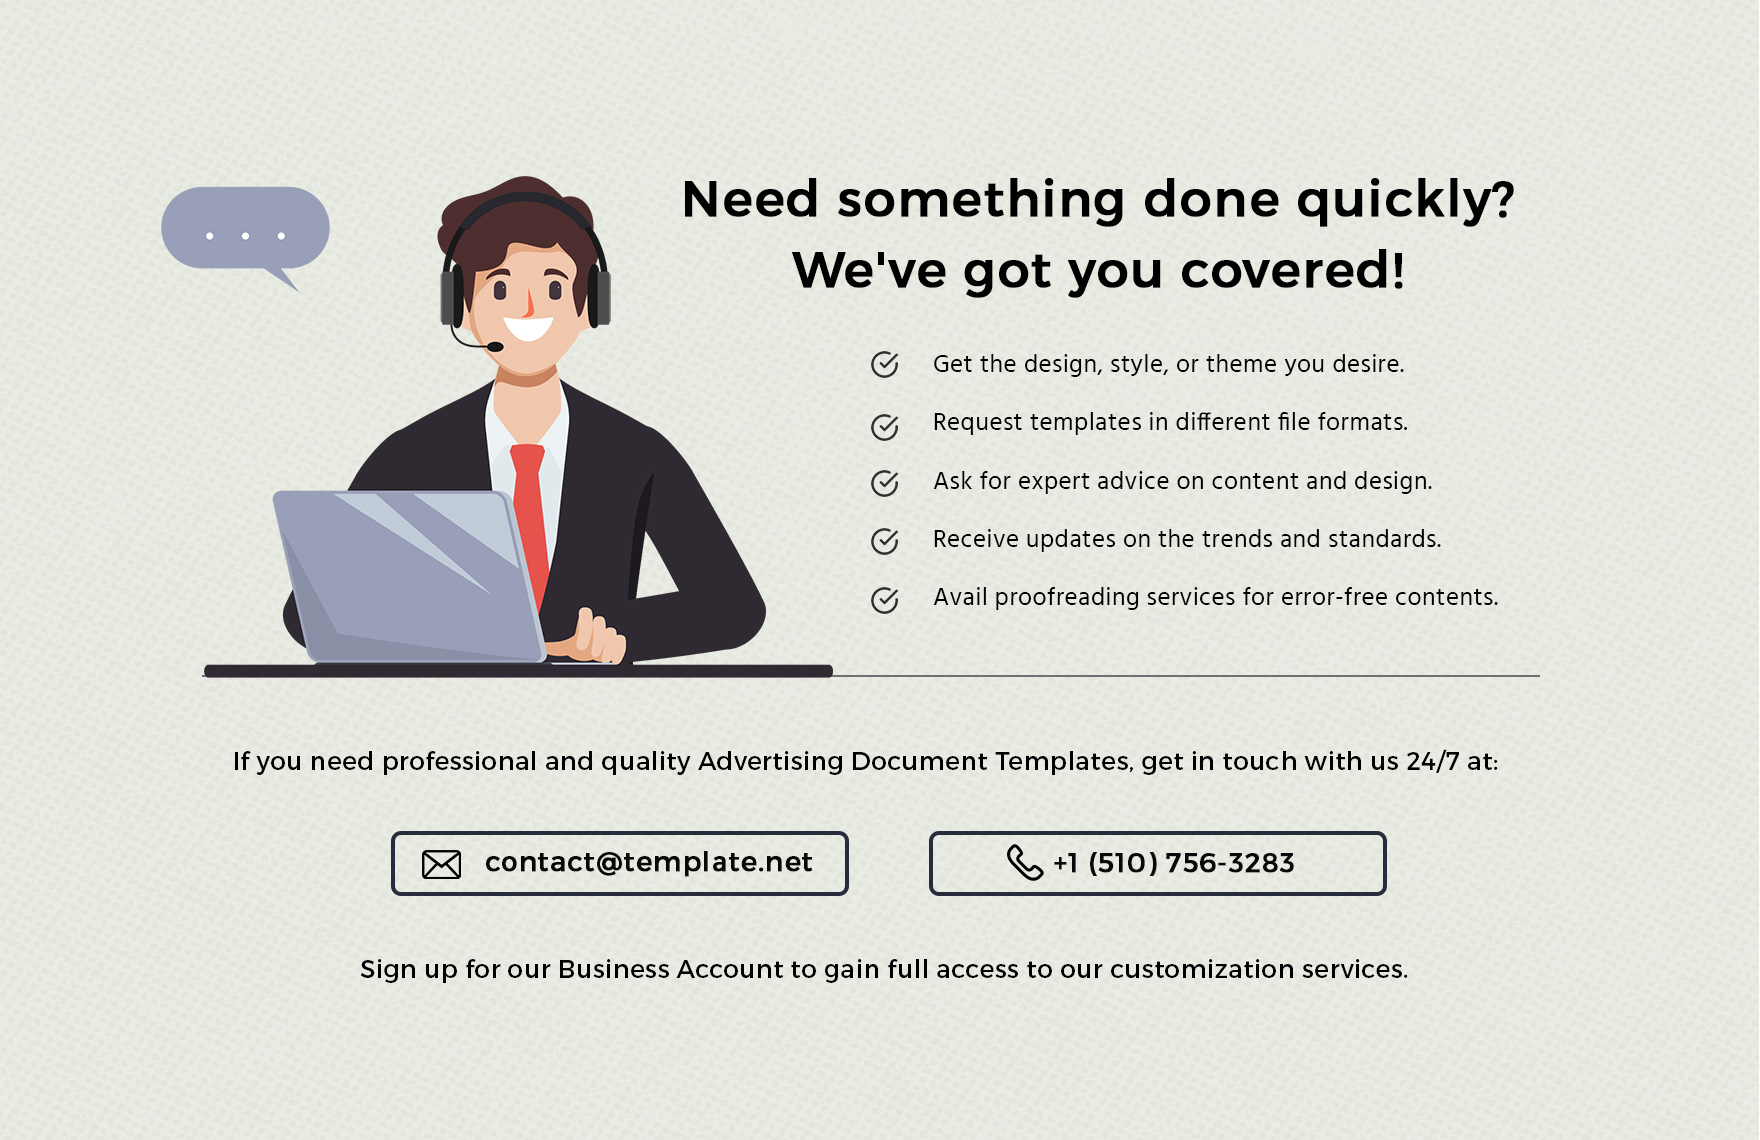 Advertising Email Marketing Campaign Guide Template